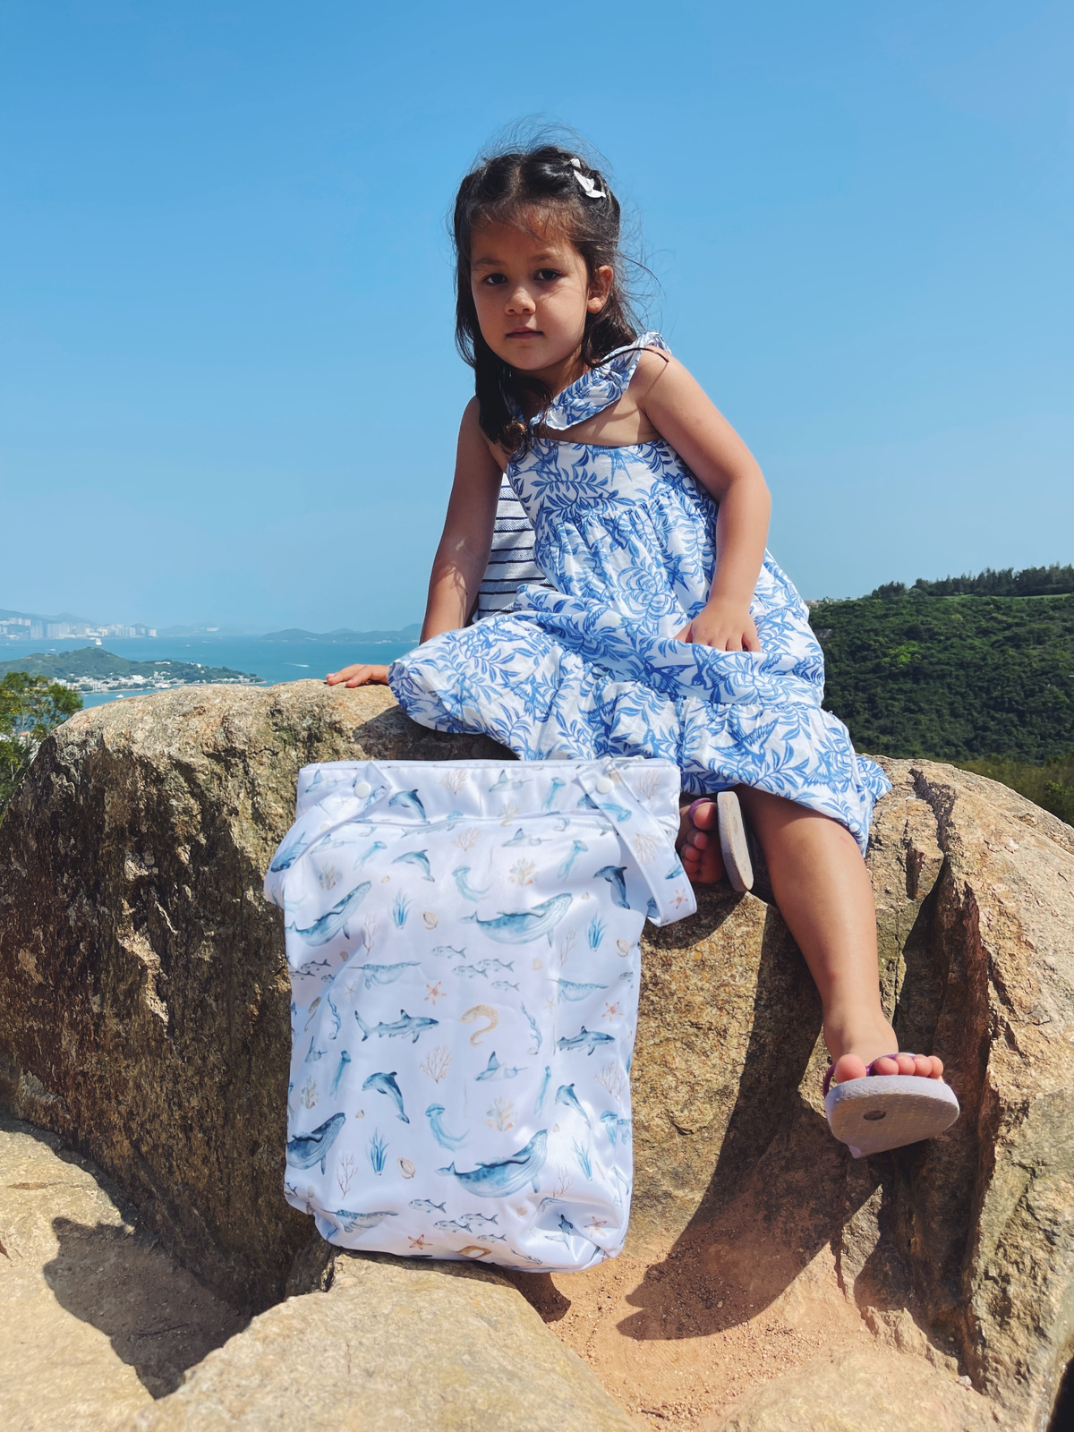 This On-The-Go Wet/Dry Bag has so much capacity and is so multi-functional. Its waterproof wet compartment and spacious dry compartment make it the perfect companion to carry everything your baby needs for a day out, a day at the beach, full day nursery, swim class or even just a quick trip down to the park.